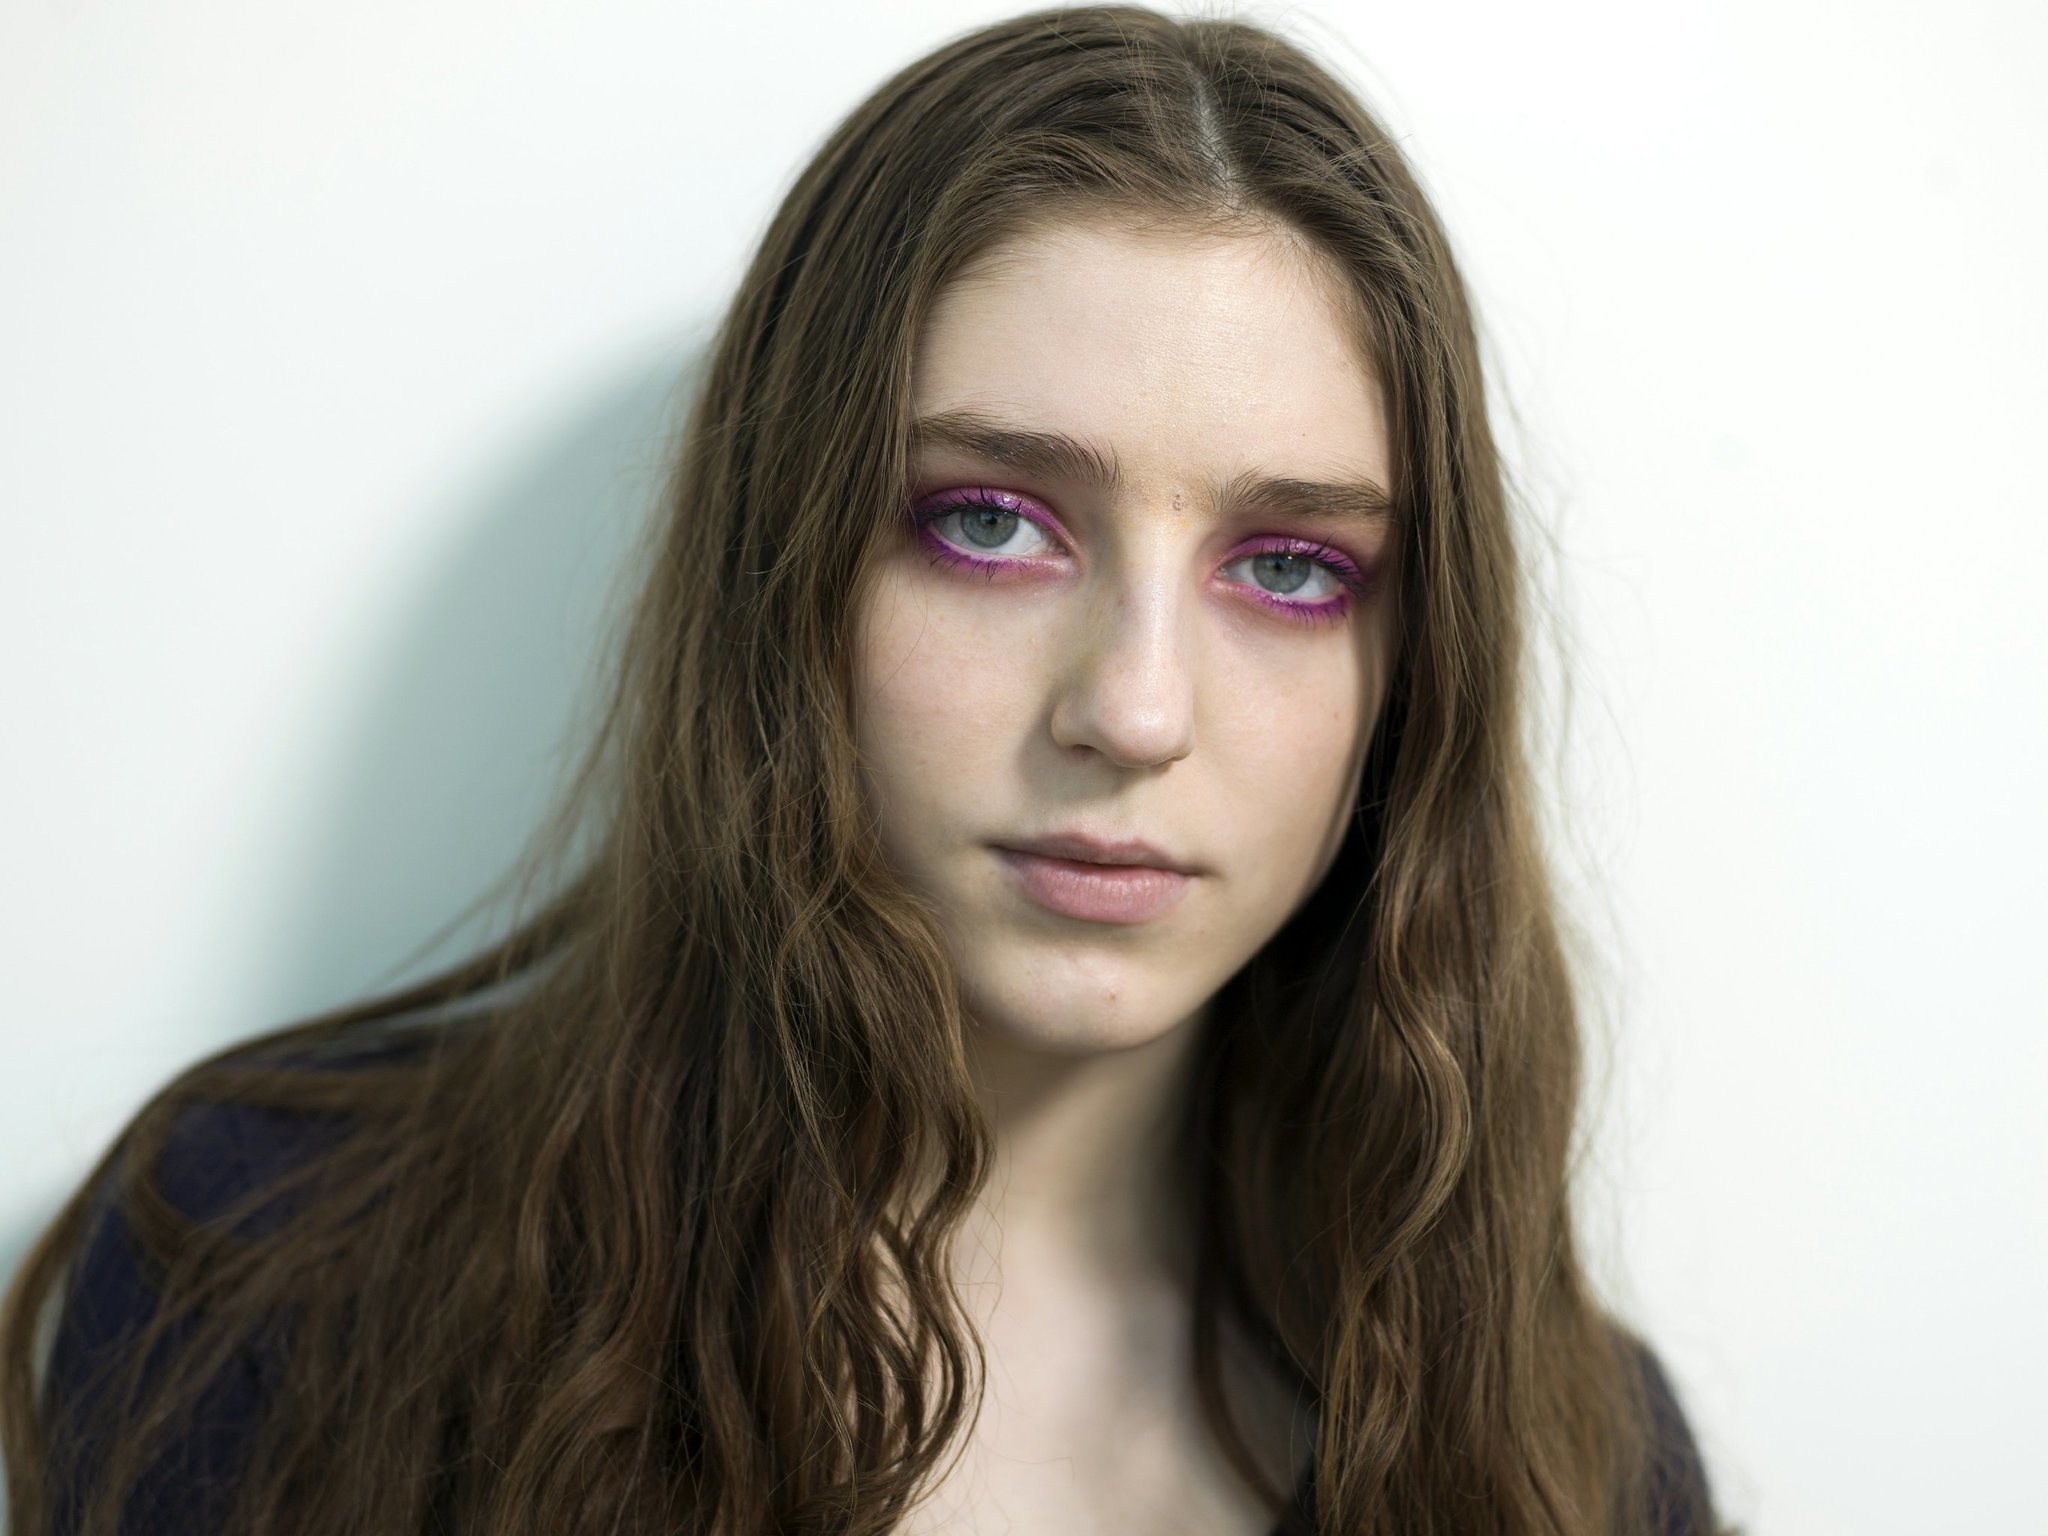 Singer Birdy finds freedom on 3rd album, 'Beautiful Lies' - The San ...